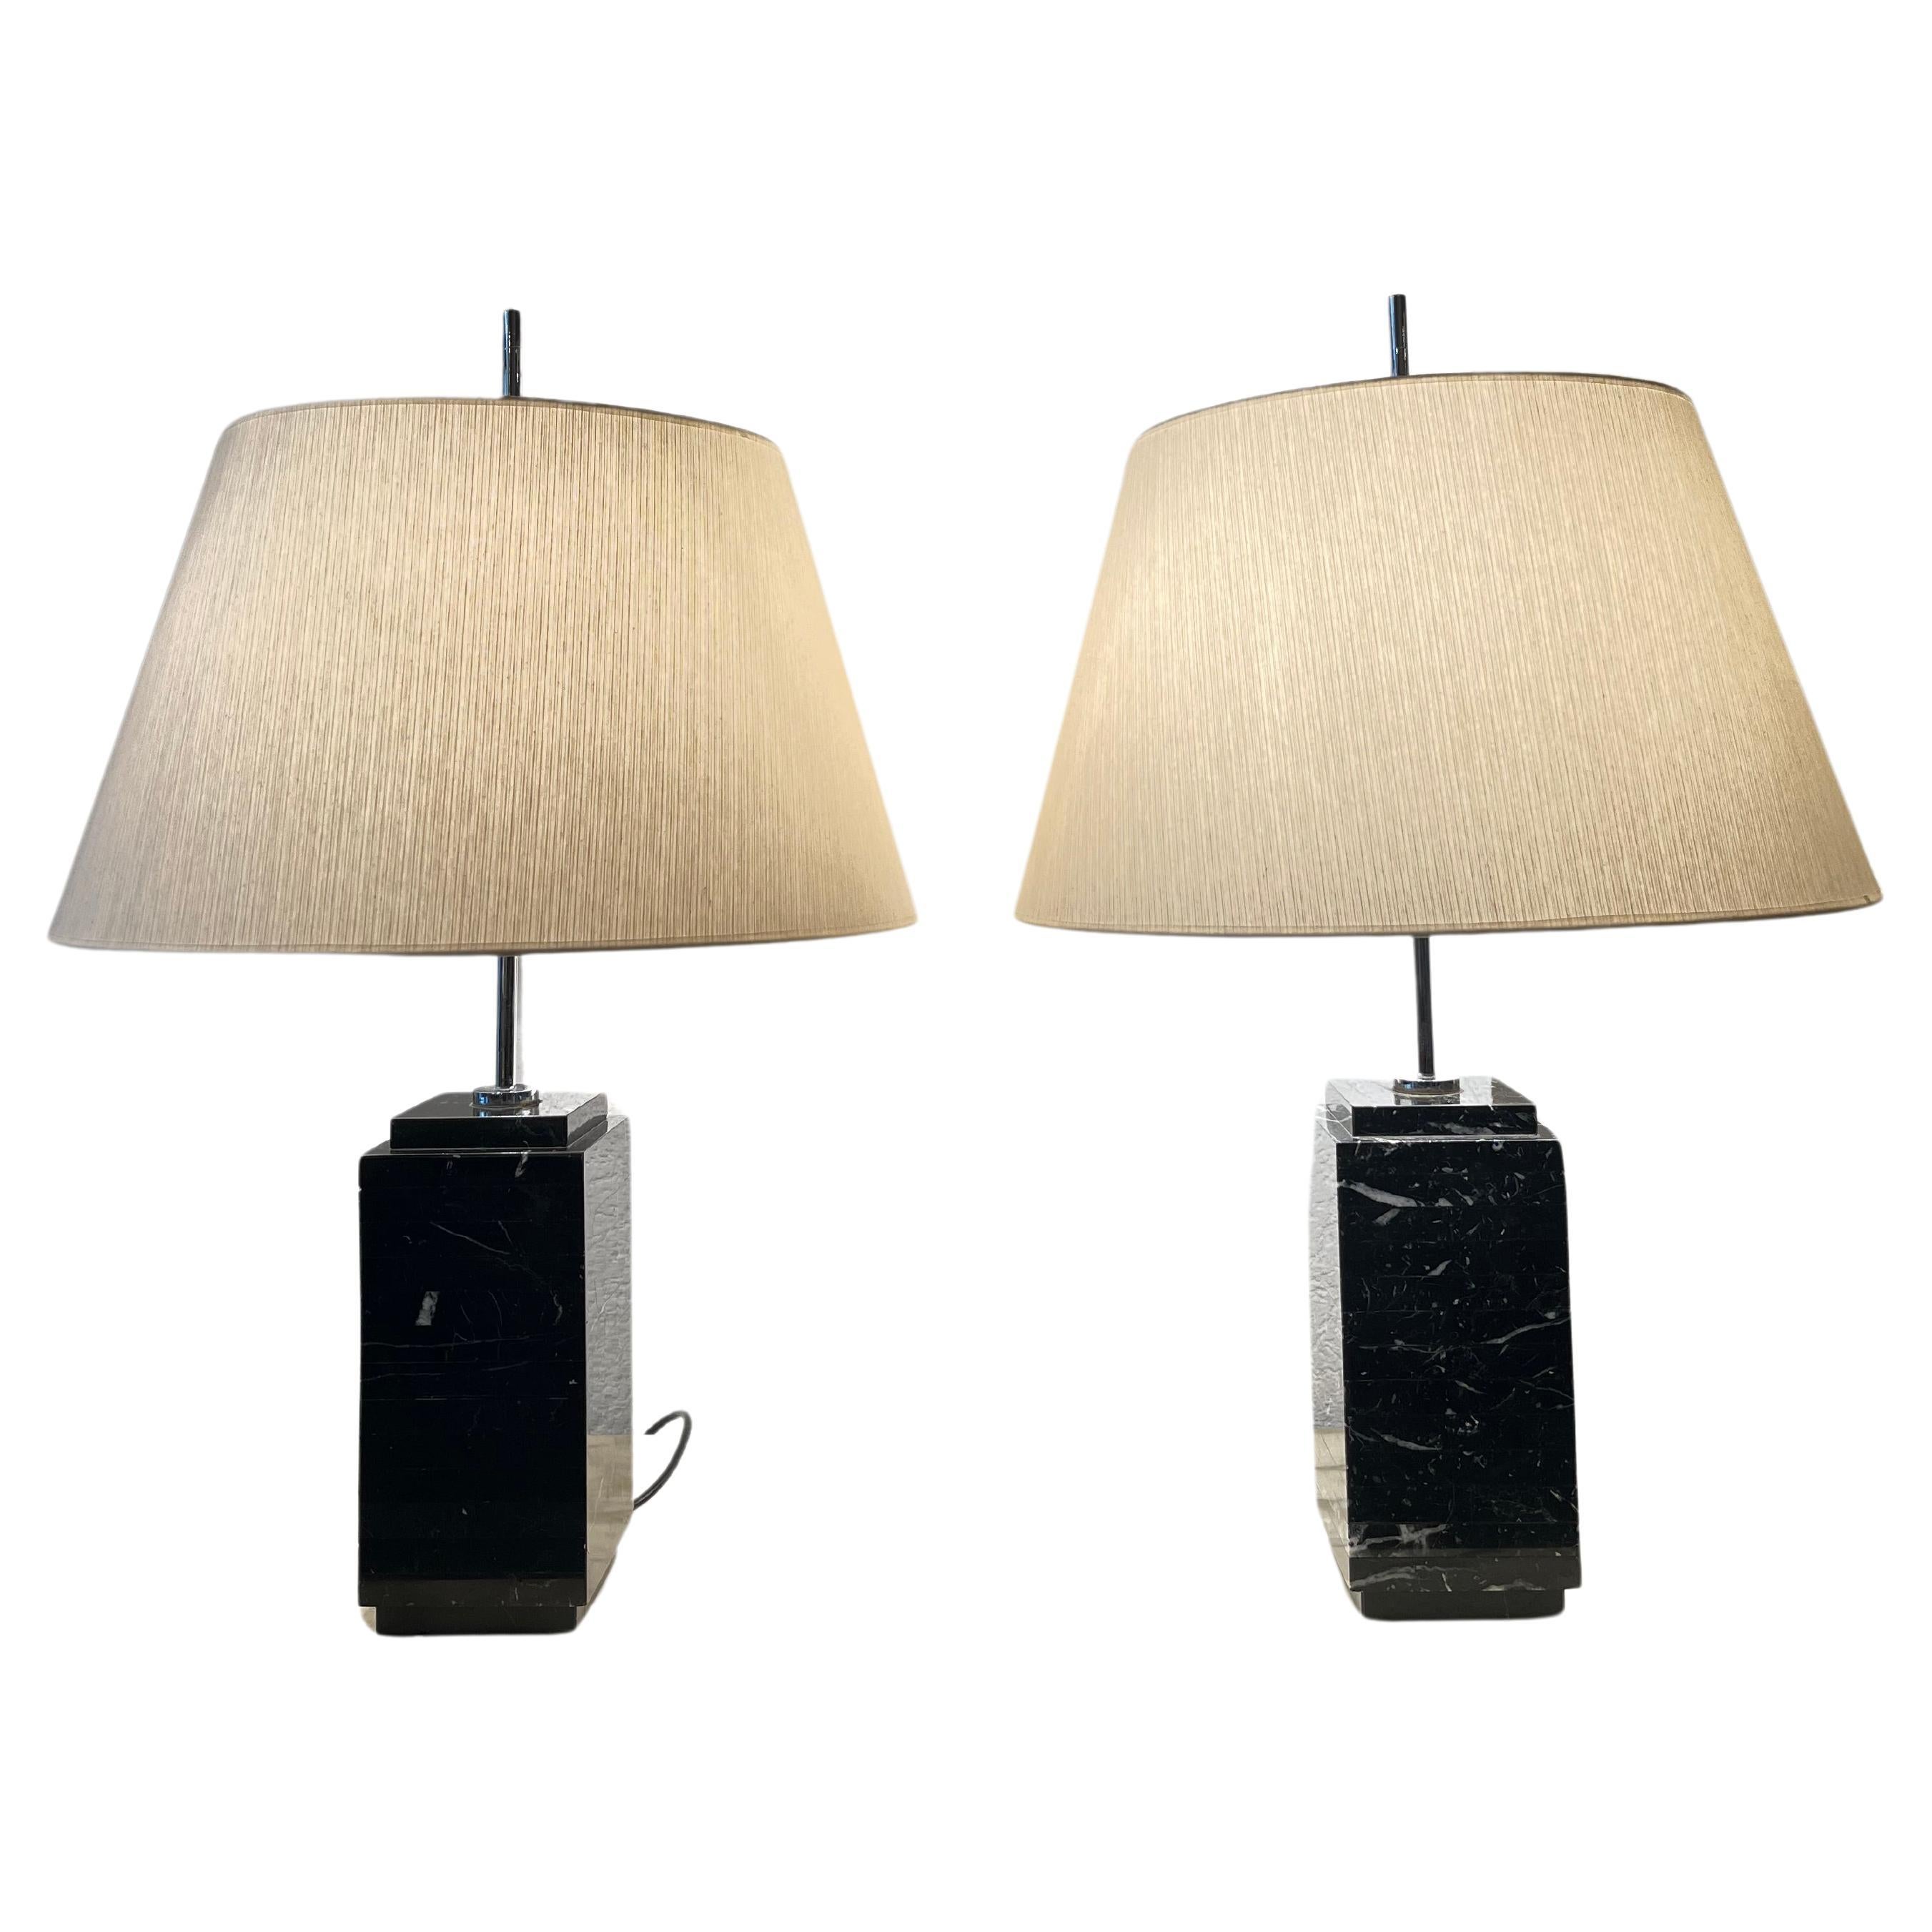 Pair of Black Marble Table Lamps by Florence Knoll, US ca. 1960s For Sale